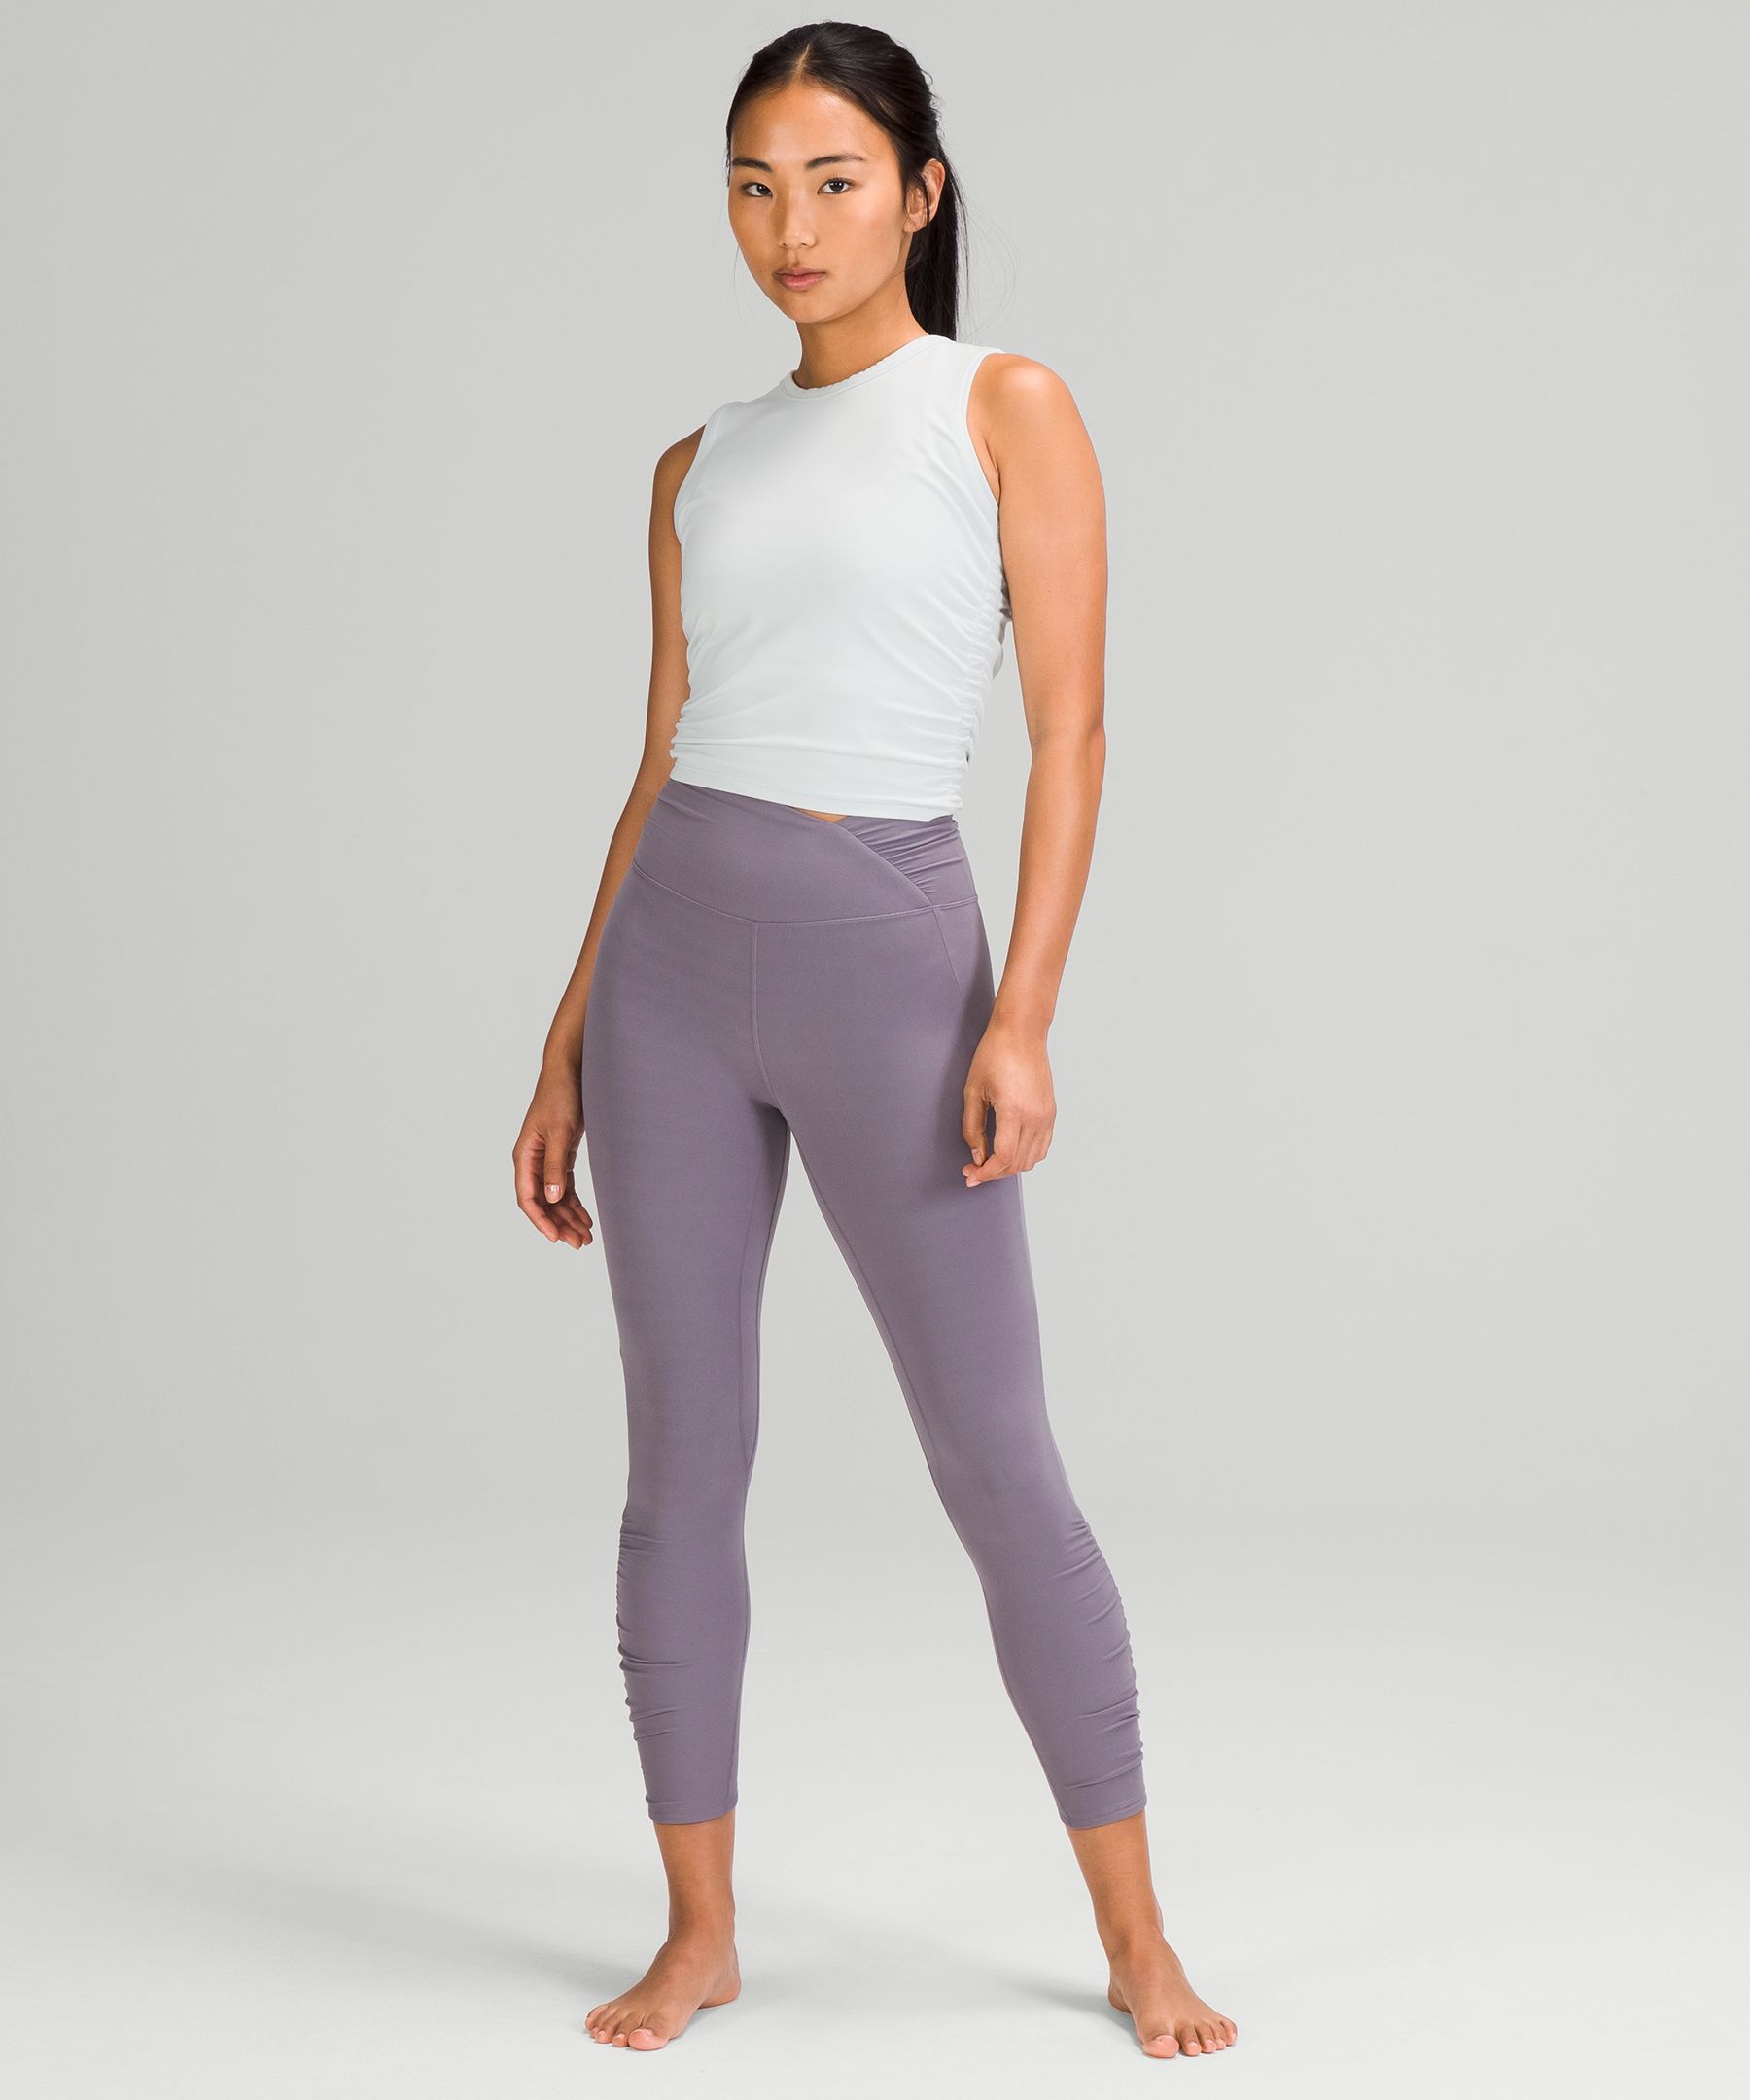 BNWT Lululemon Align Asian Fit Waterdrop - 24 inches, XS, Women's Fashion,  Activewear on Carousell